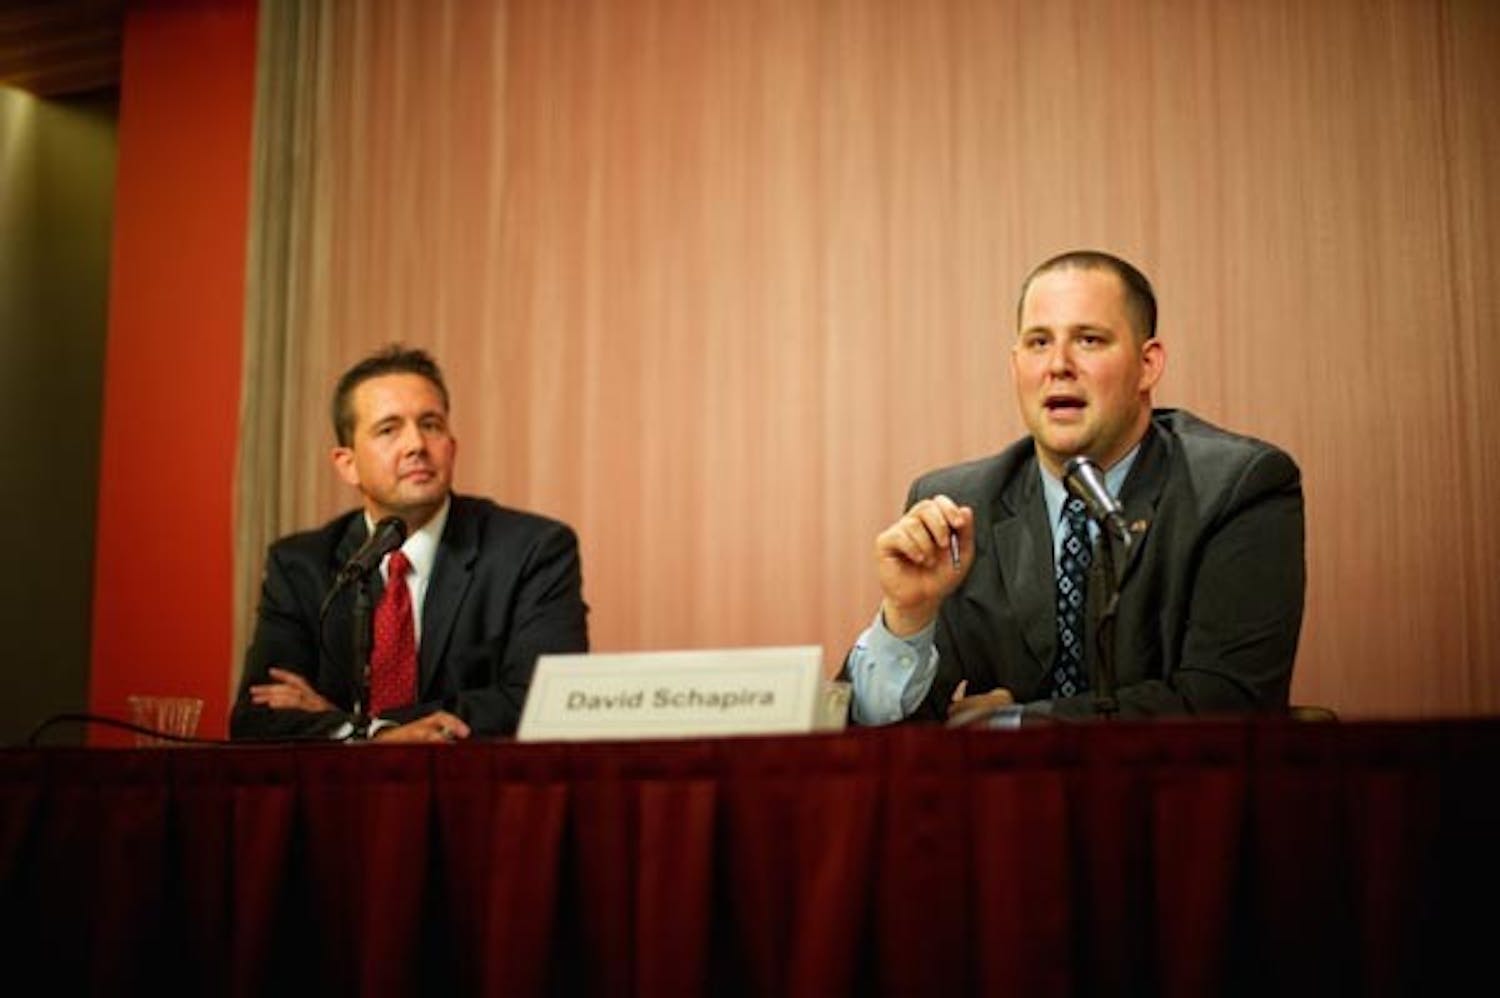 EMPTY DEBATE: David Shapira responds to a question submitted by the audience as the moderator looks on at the District 17 State Senate debate Wednesday night. His opponent, Wendy Rogers, failed to respond to requests to attend. (Photo by Michael Arellano)